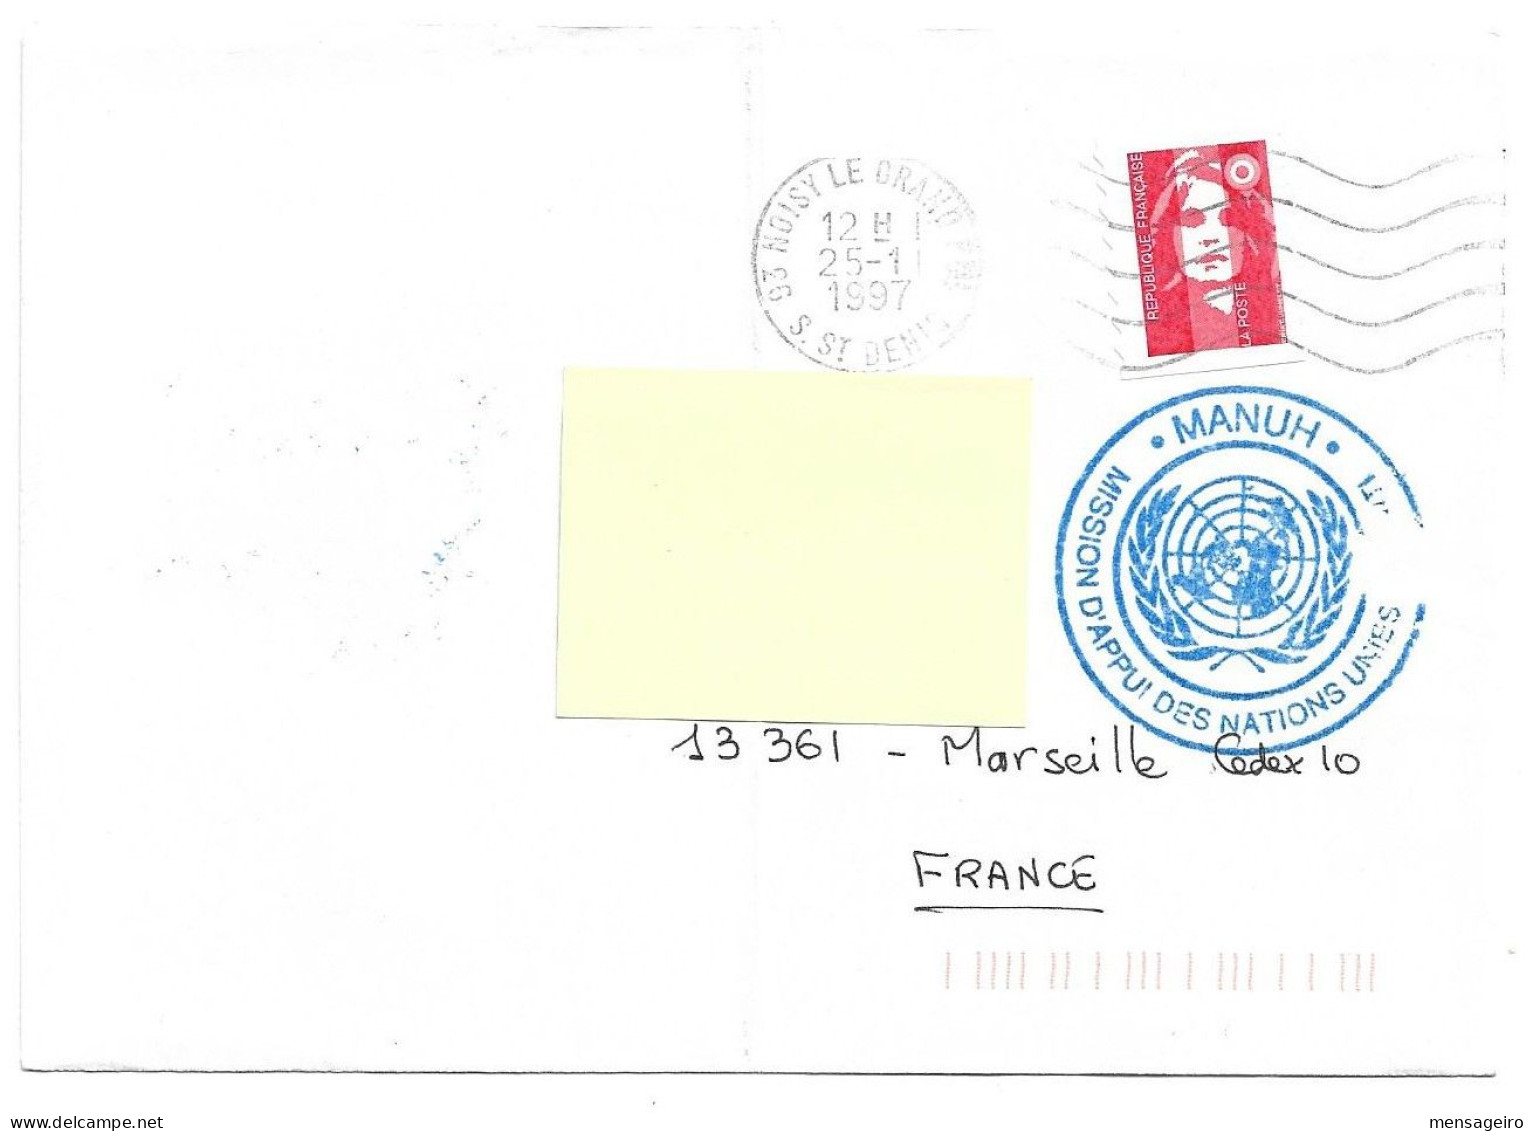 (C01) - HAITI COVER FRENCH UN ONU CONTINGENT IN HAITI MISSION MANUH => FRANCE 1997 - Covers & Documents